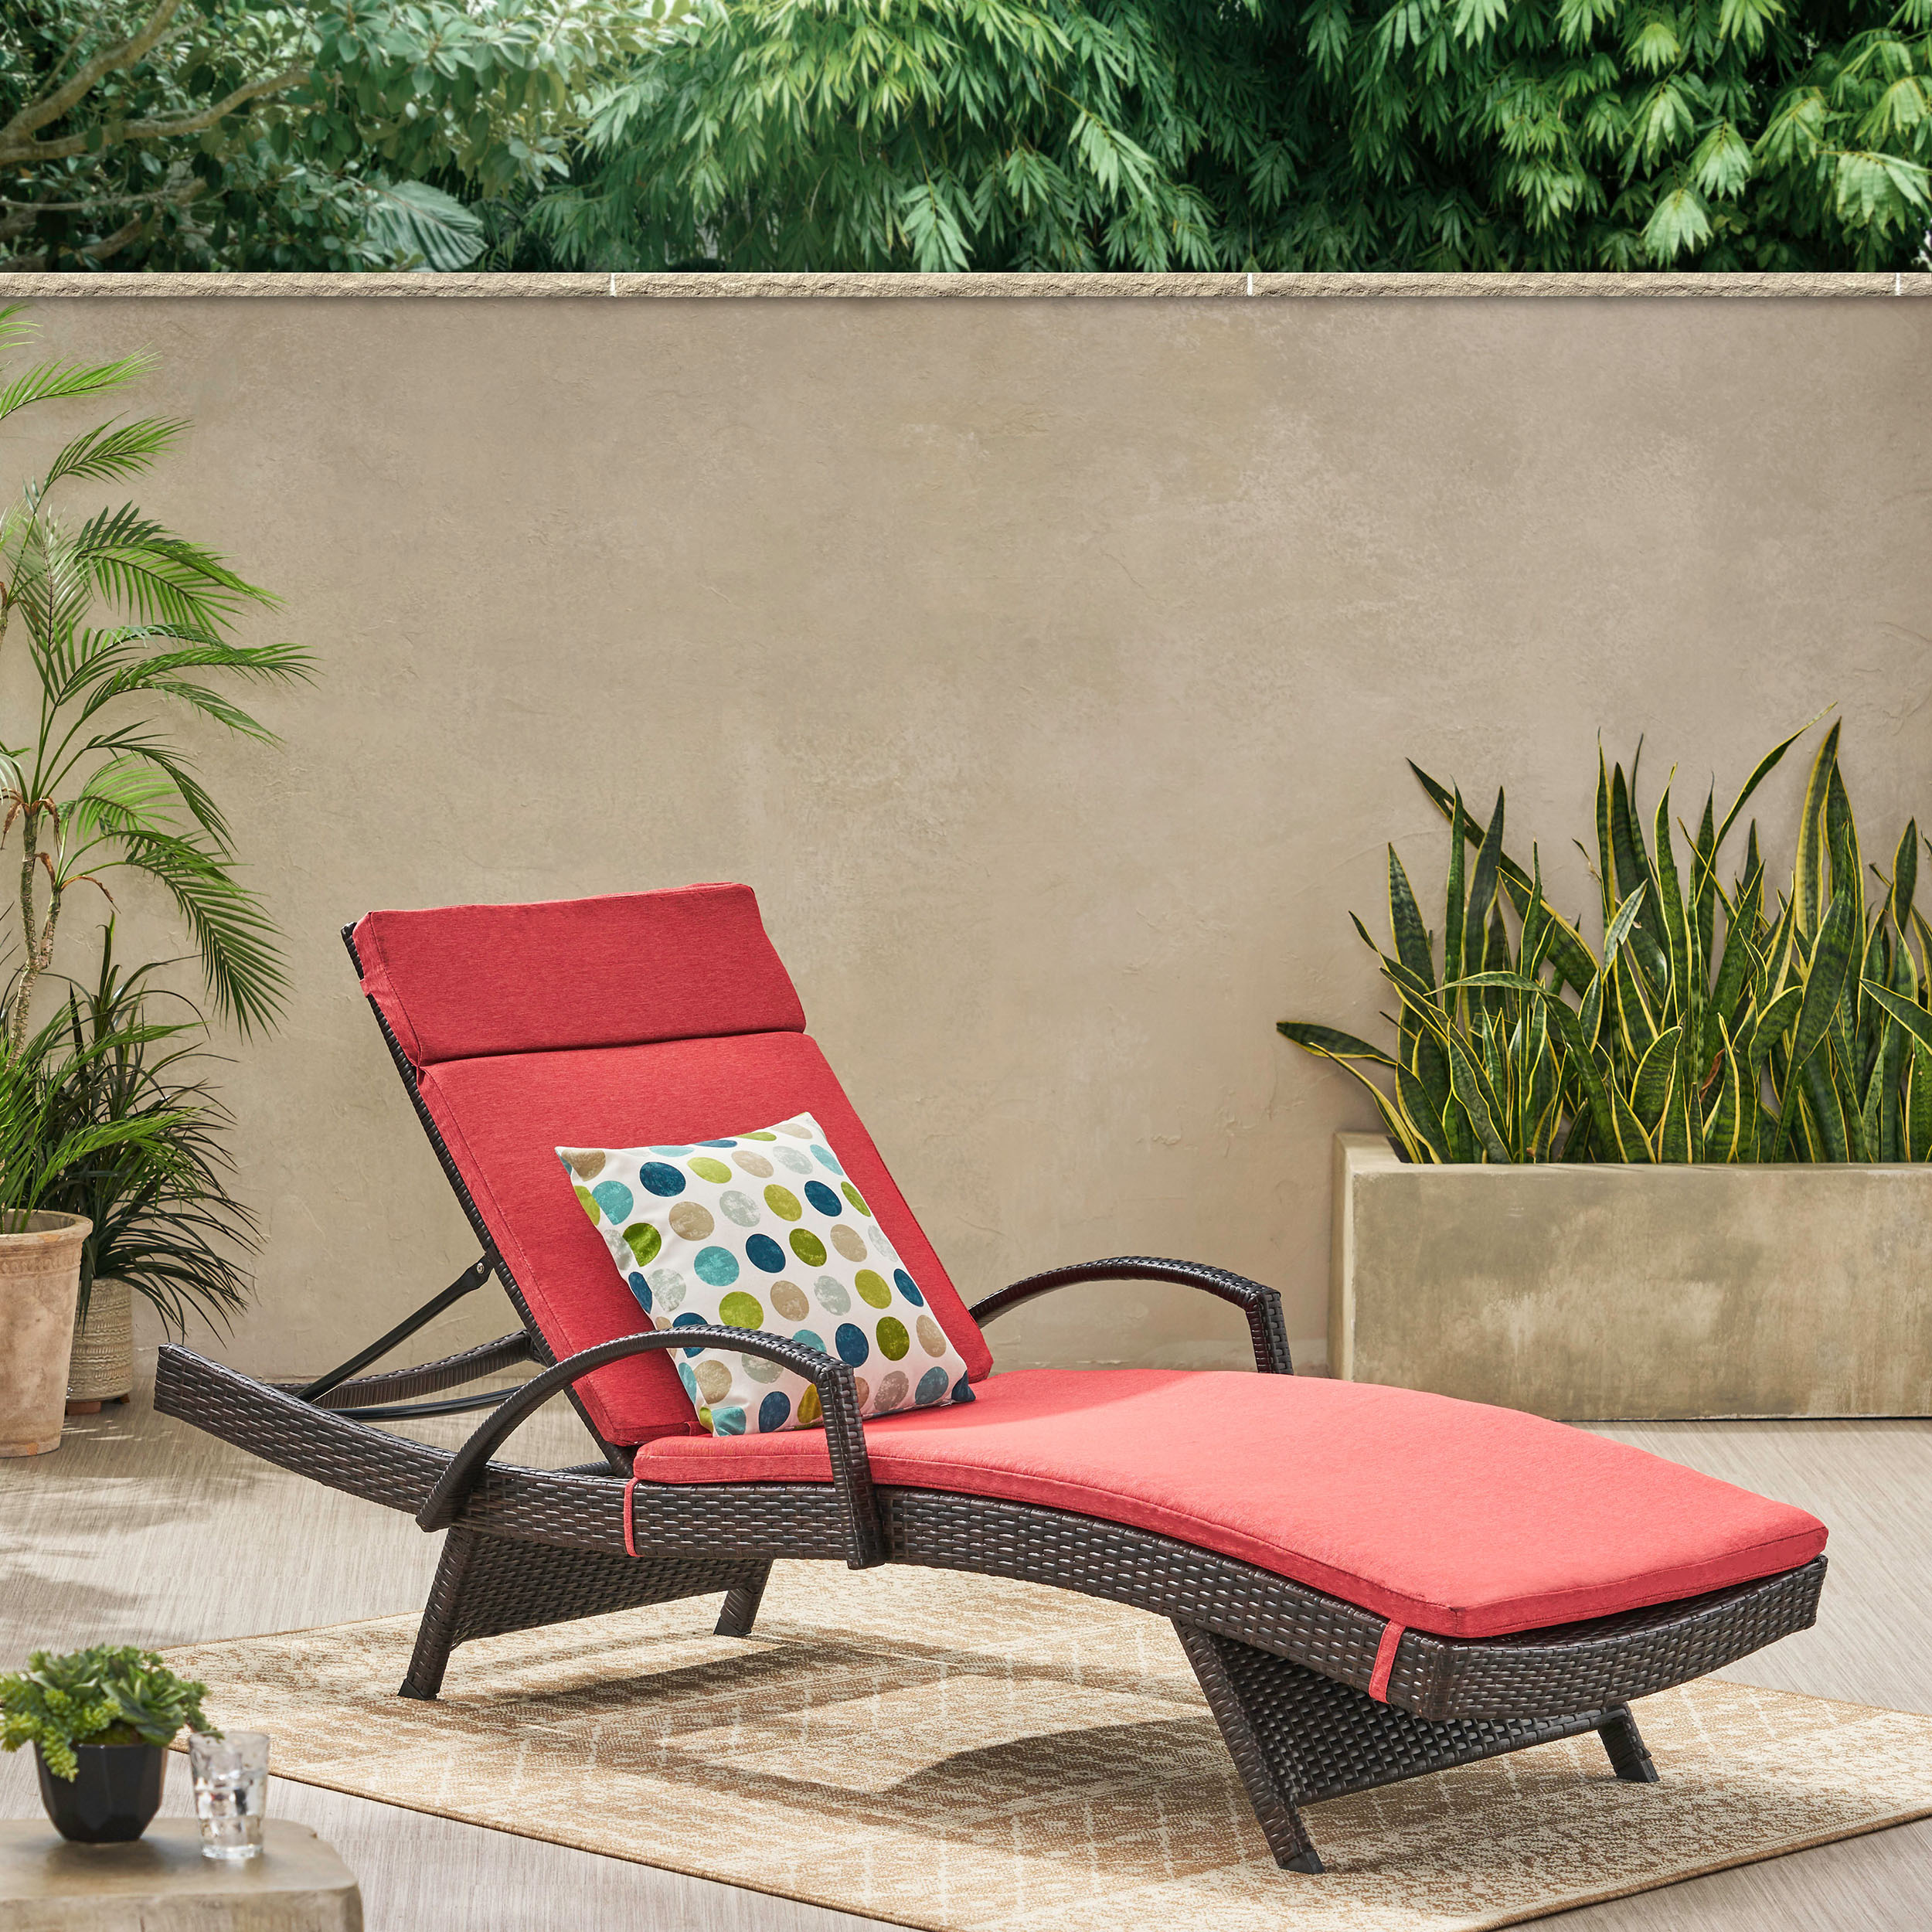 GDF Studio Olivia Outdoor Wicker Adjustable Chaise Lounge with Cushion, Multibrown and Red - image 5 of 8